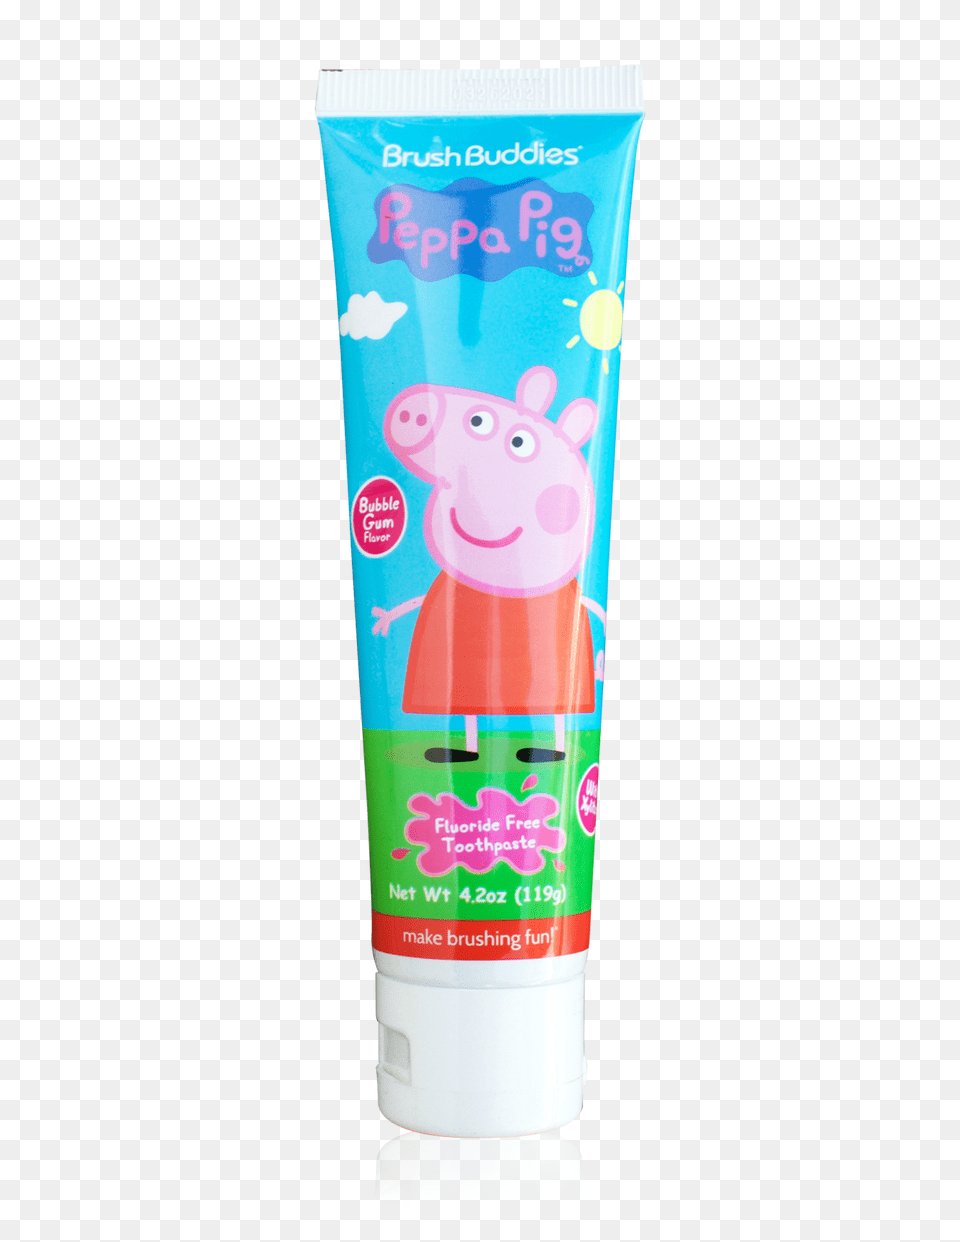 Brush Buddies Peppa Pig Bubble Gum Toothpaste Oz, Bottle, Lotion, Cosmetics Free Transparent Png